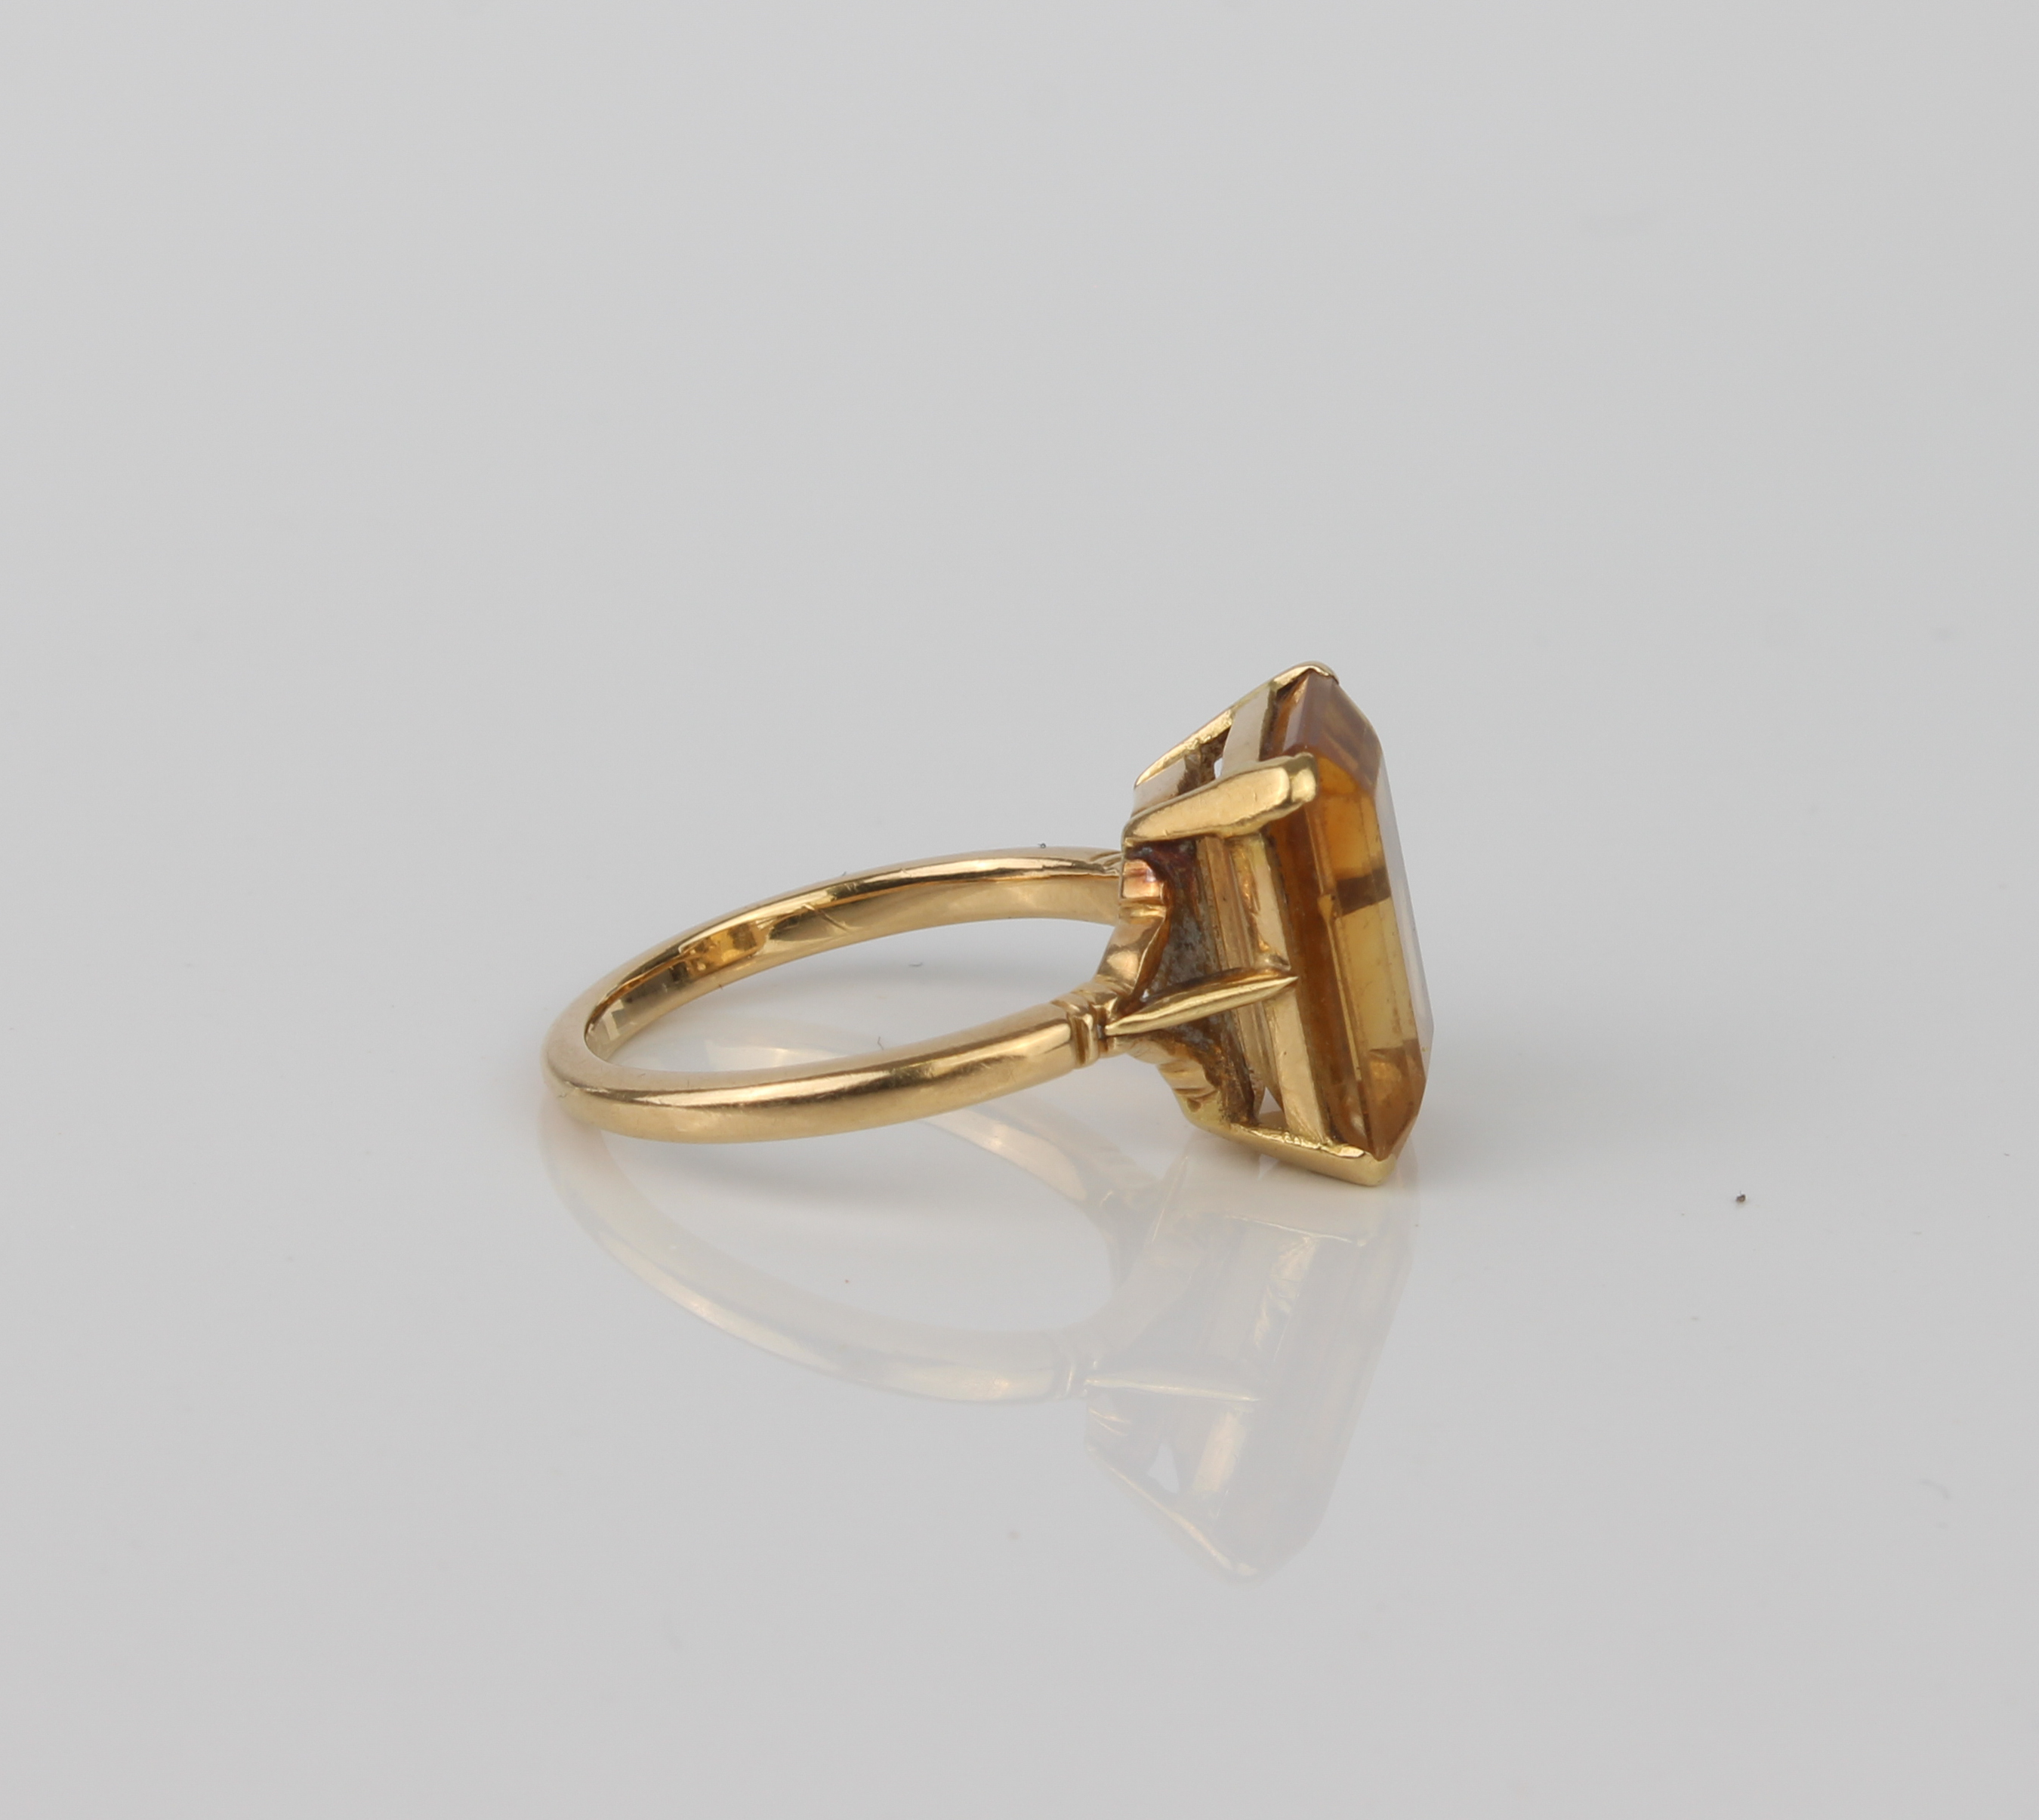 An 18ct yellow gold and yellow stone ring - unmarked, tests as 18ct gold, probably yellow - Bild 3 aus 4